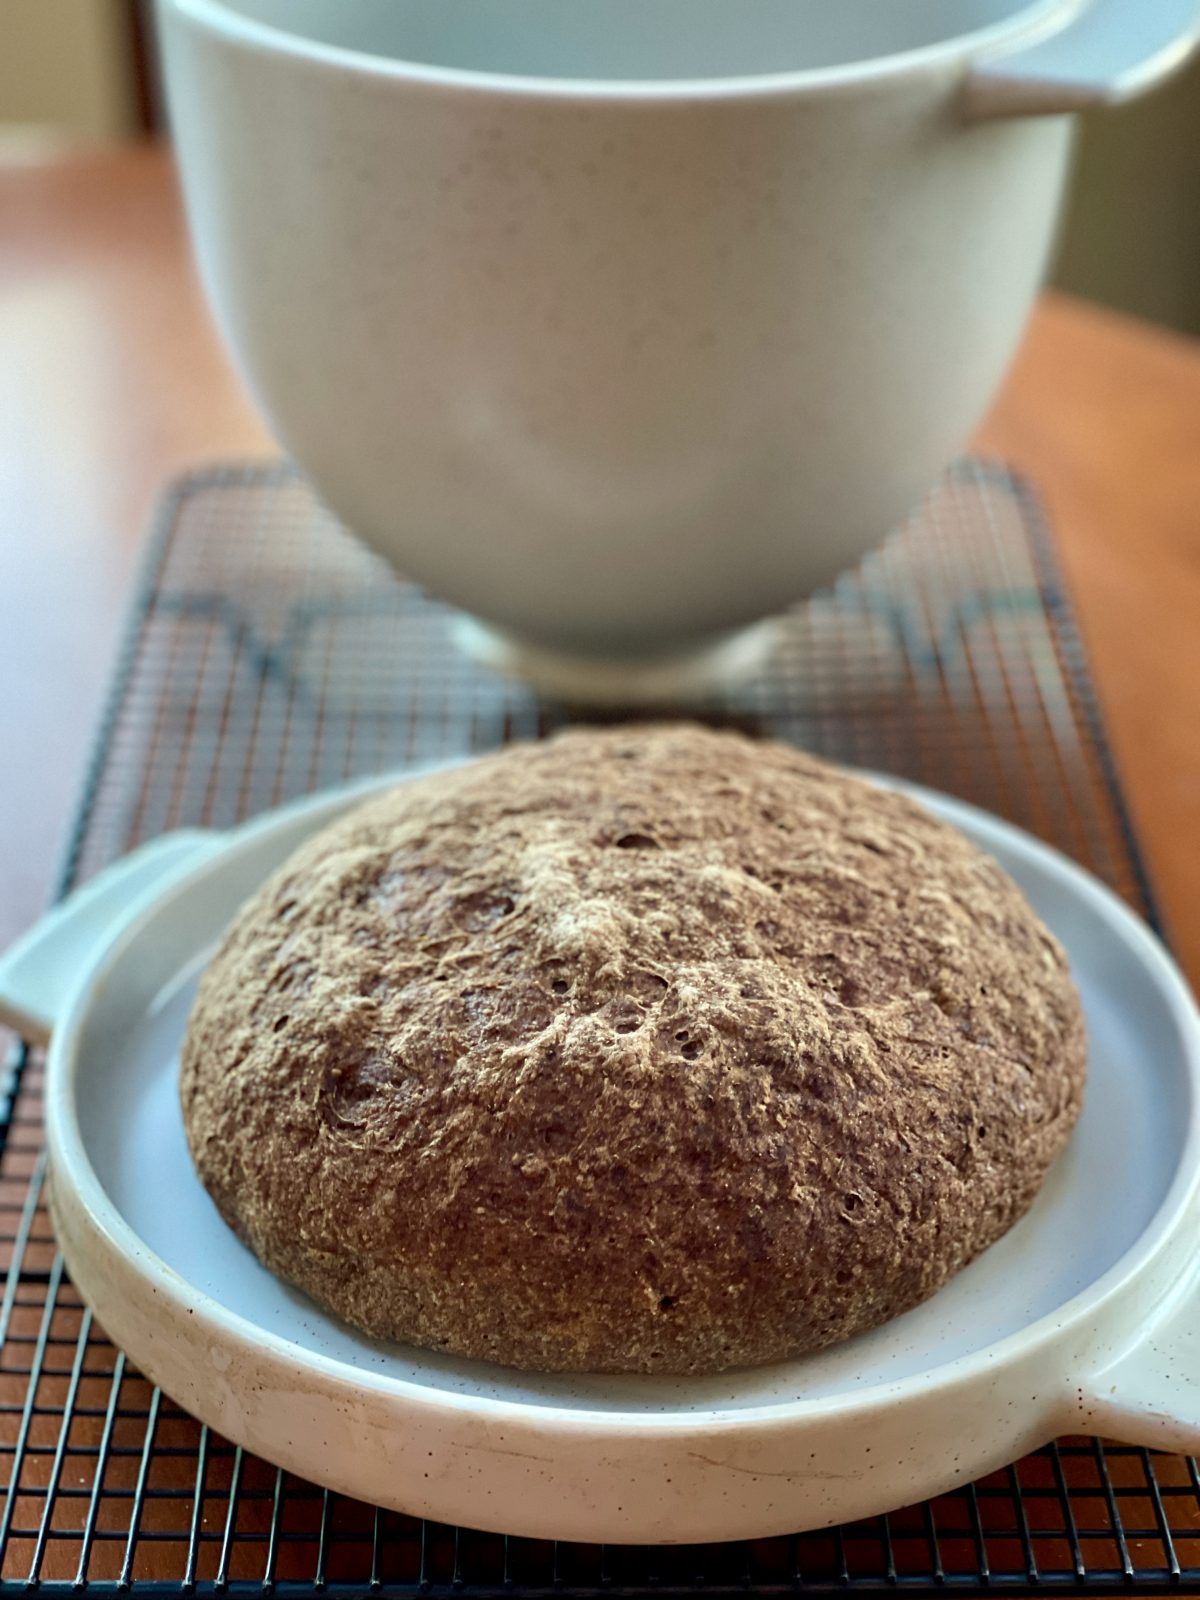 KitchenAid Launches Bread Bowl with Lid: August 2021